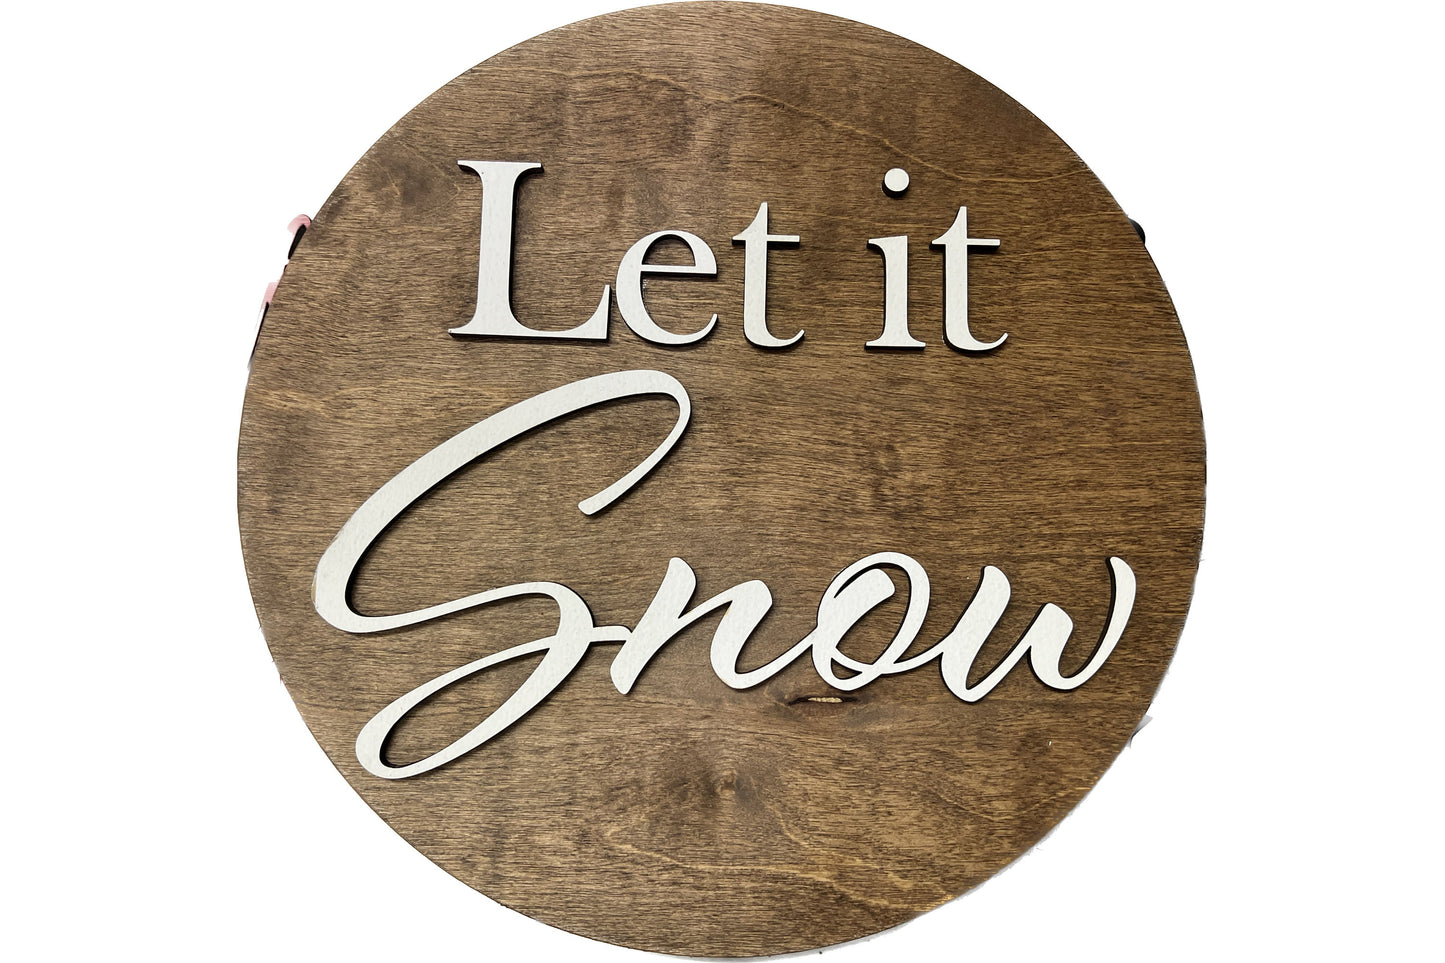 Let it snow sign, Christmas decorations, 3D holiday decor, wood signs, living room wooden sign wall hanging, front porch or mantel decor